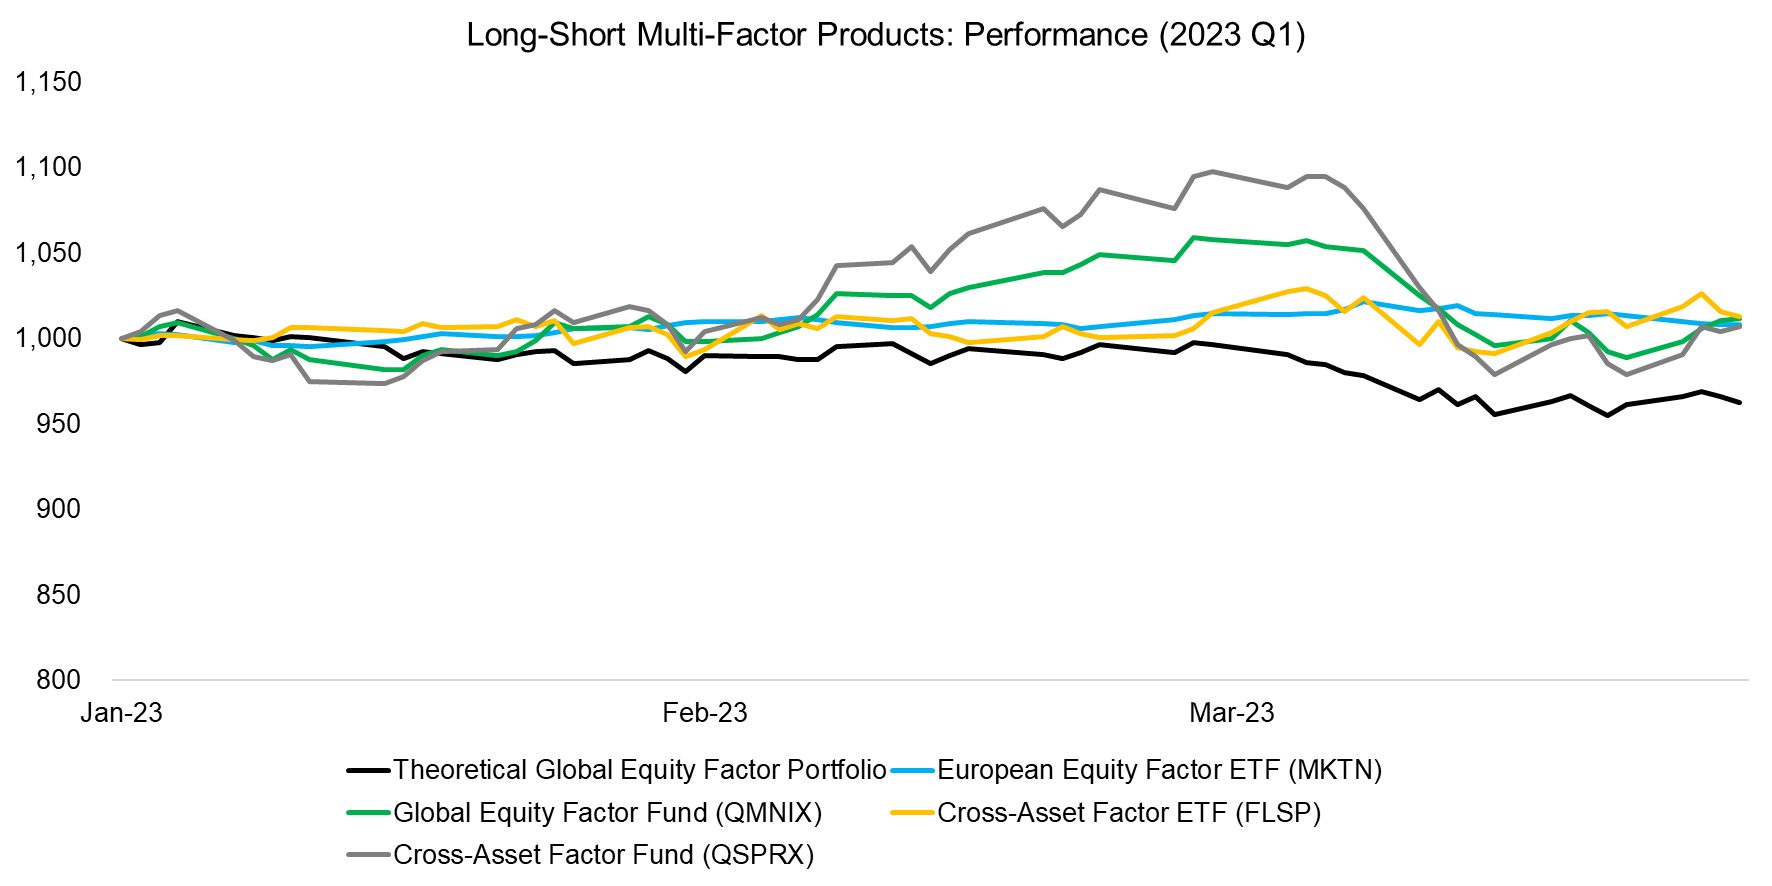 Long-Short-Multi-Factor-Products-Performance-2023-Q1